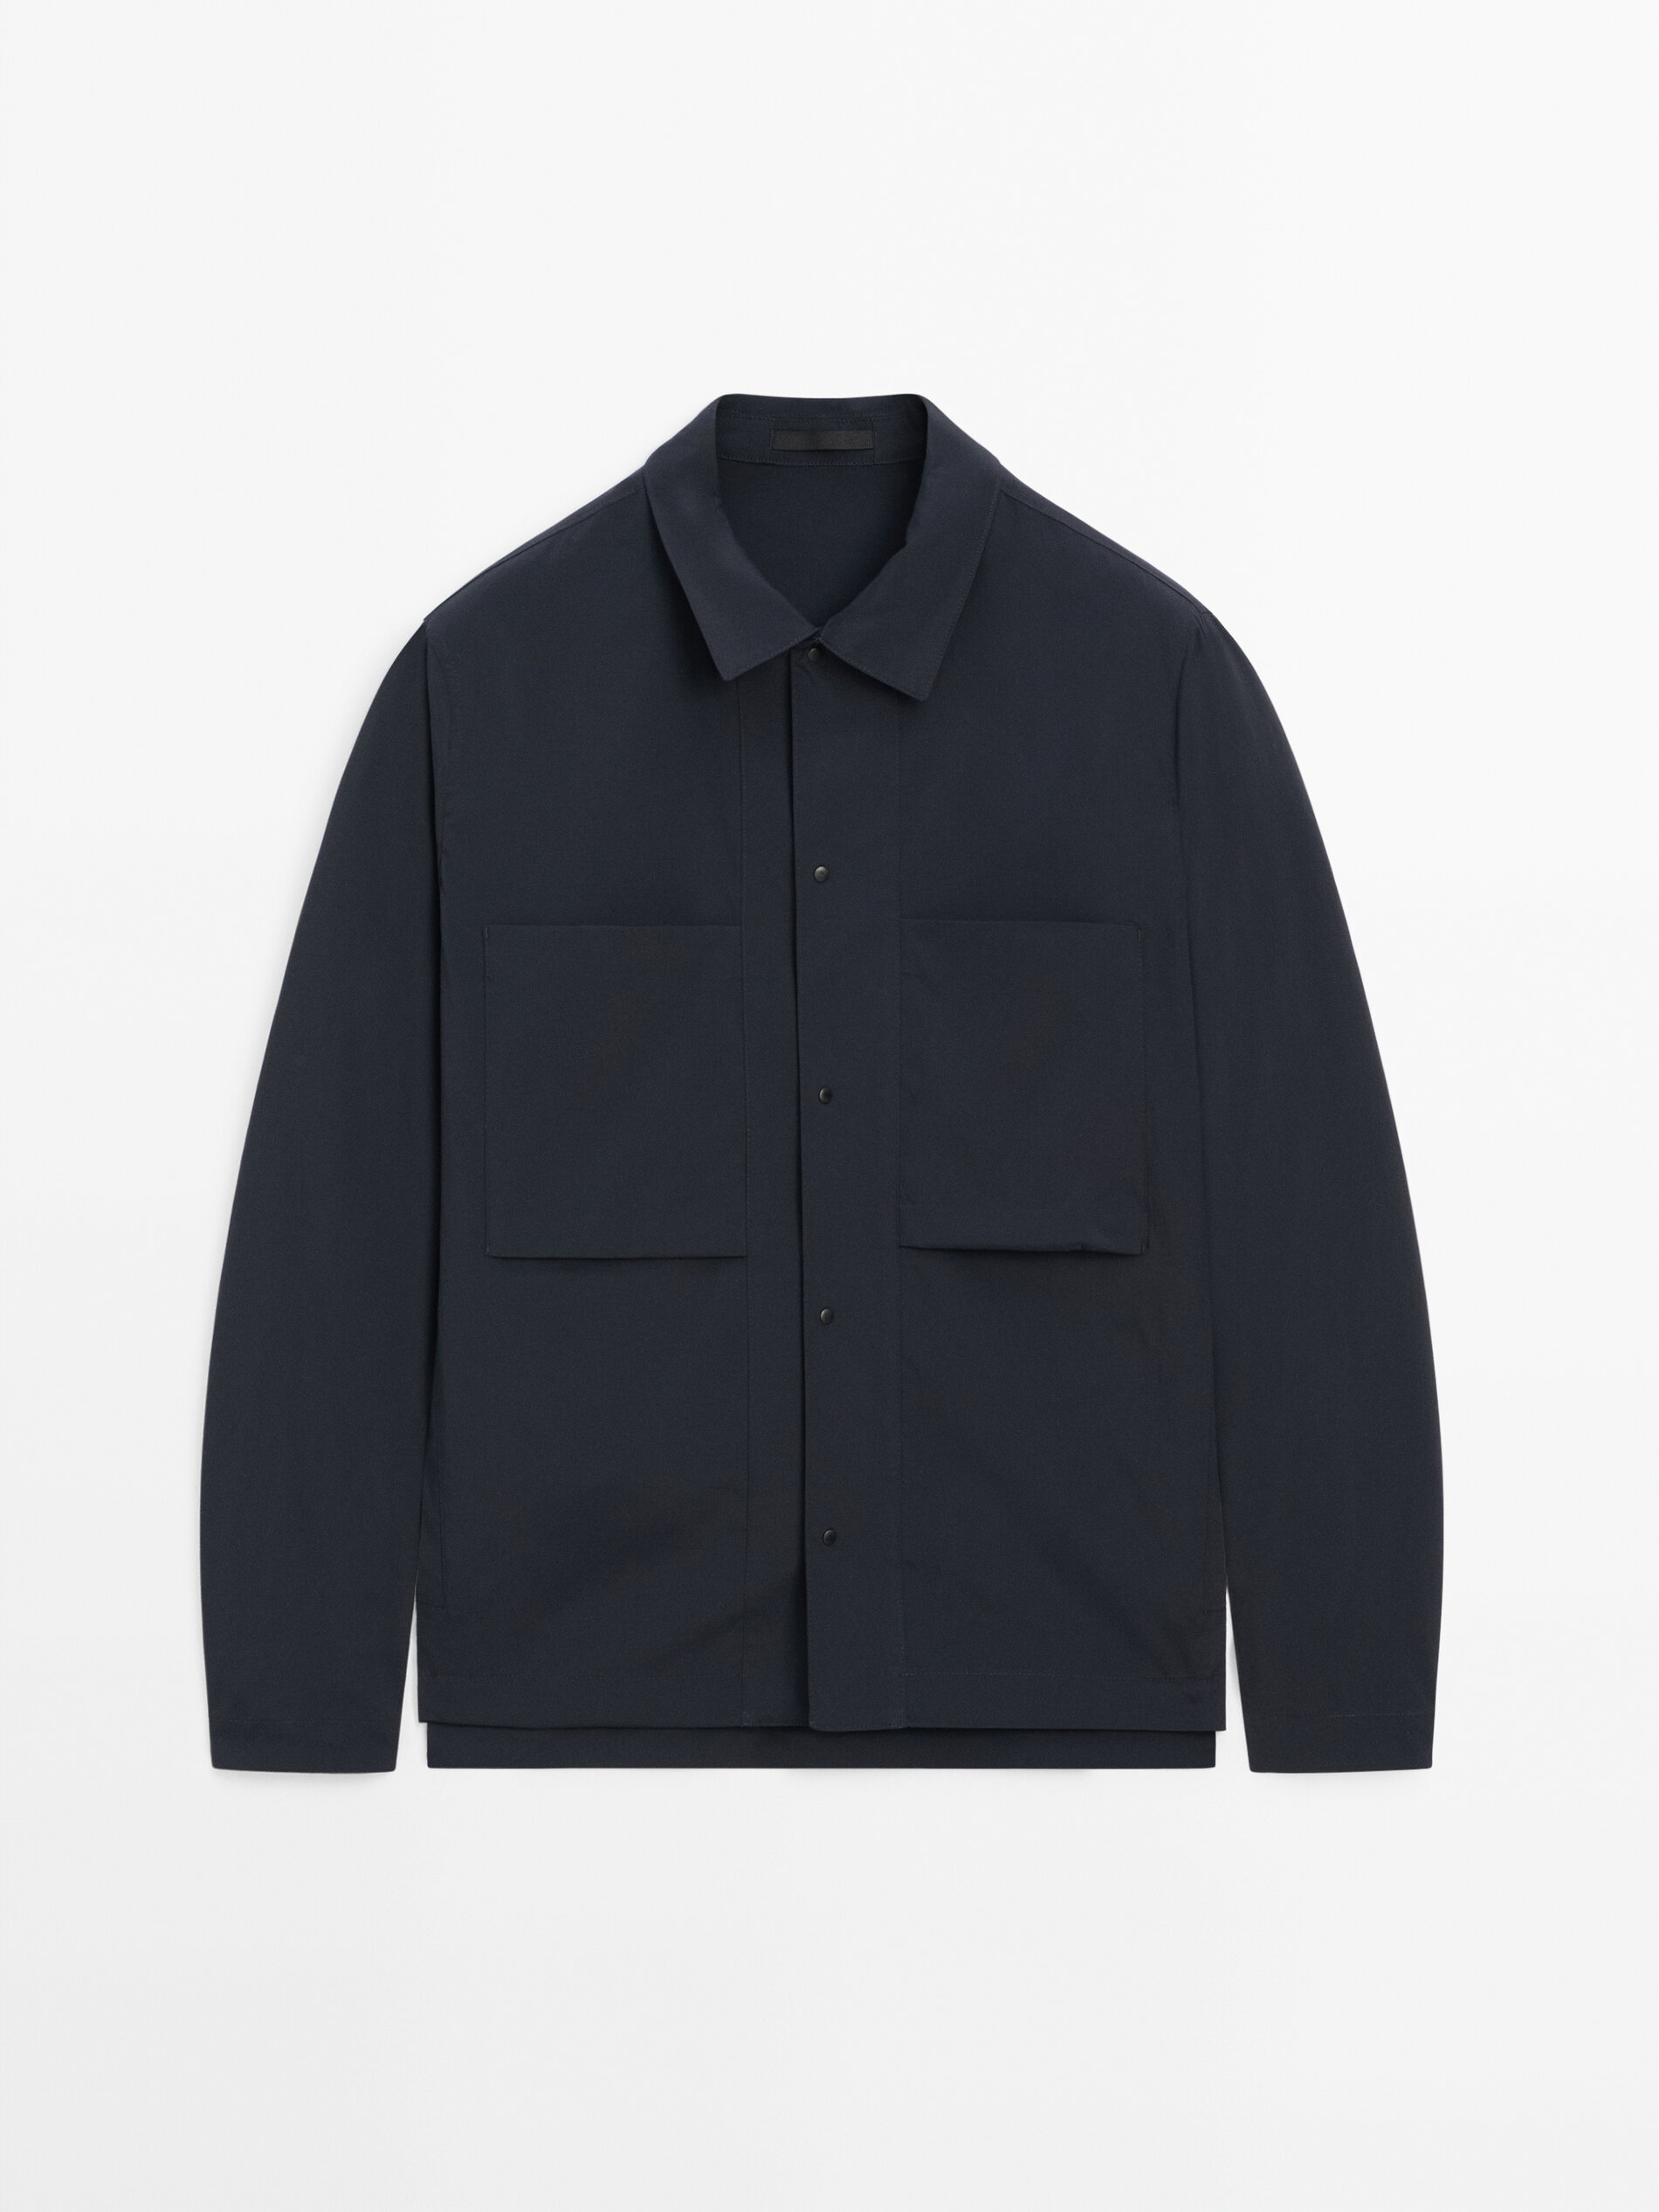 OVERSHIRT WITH CHEST POCKETS - STUDIO